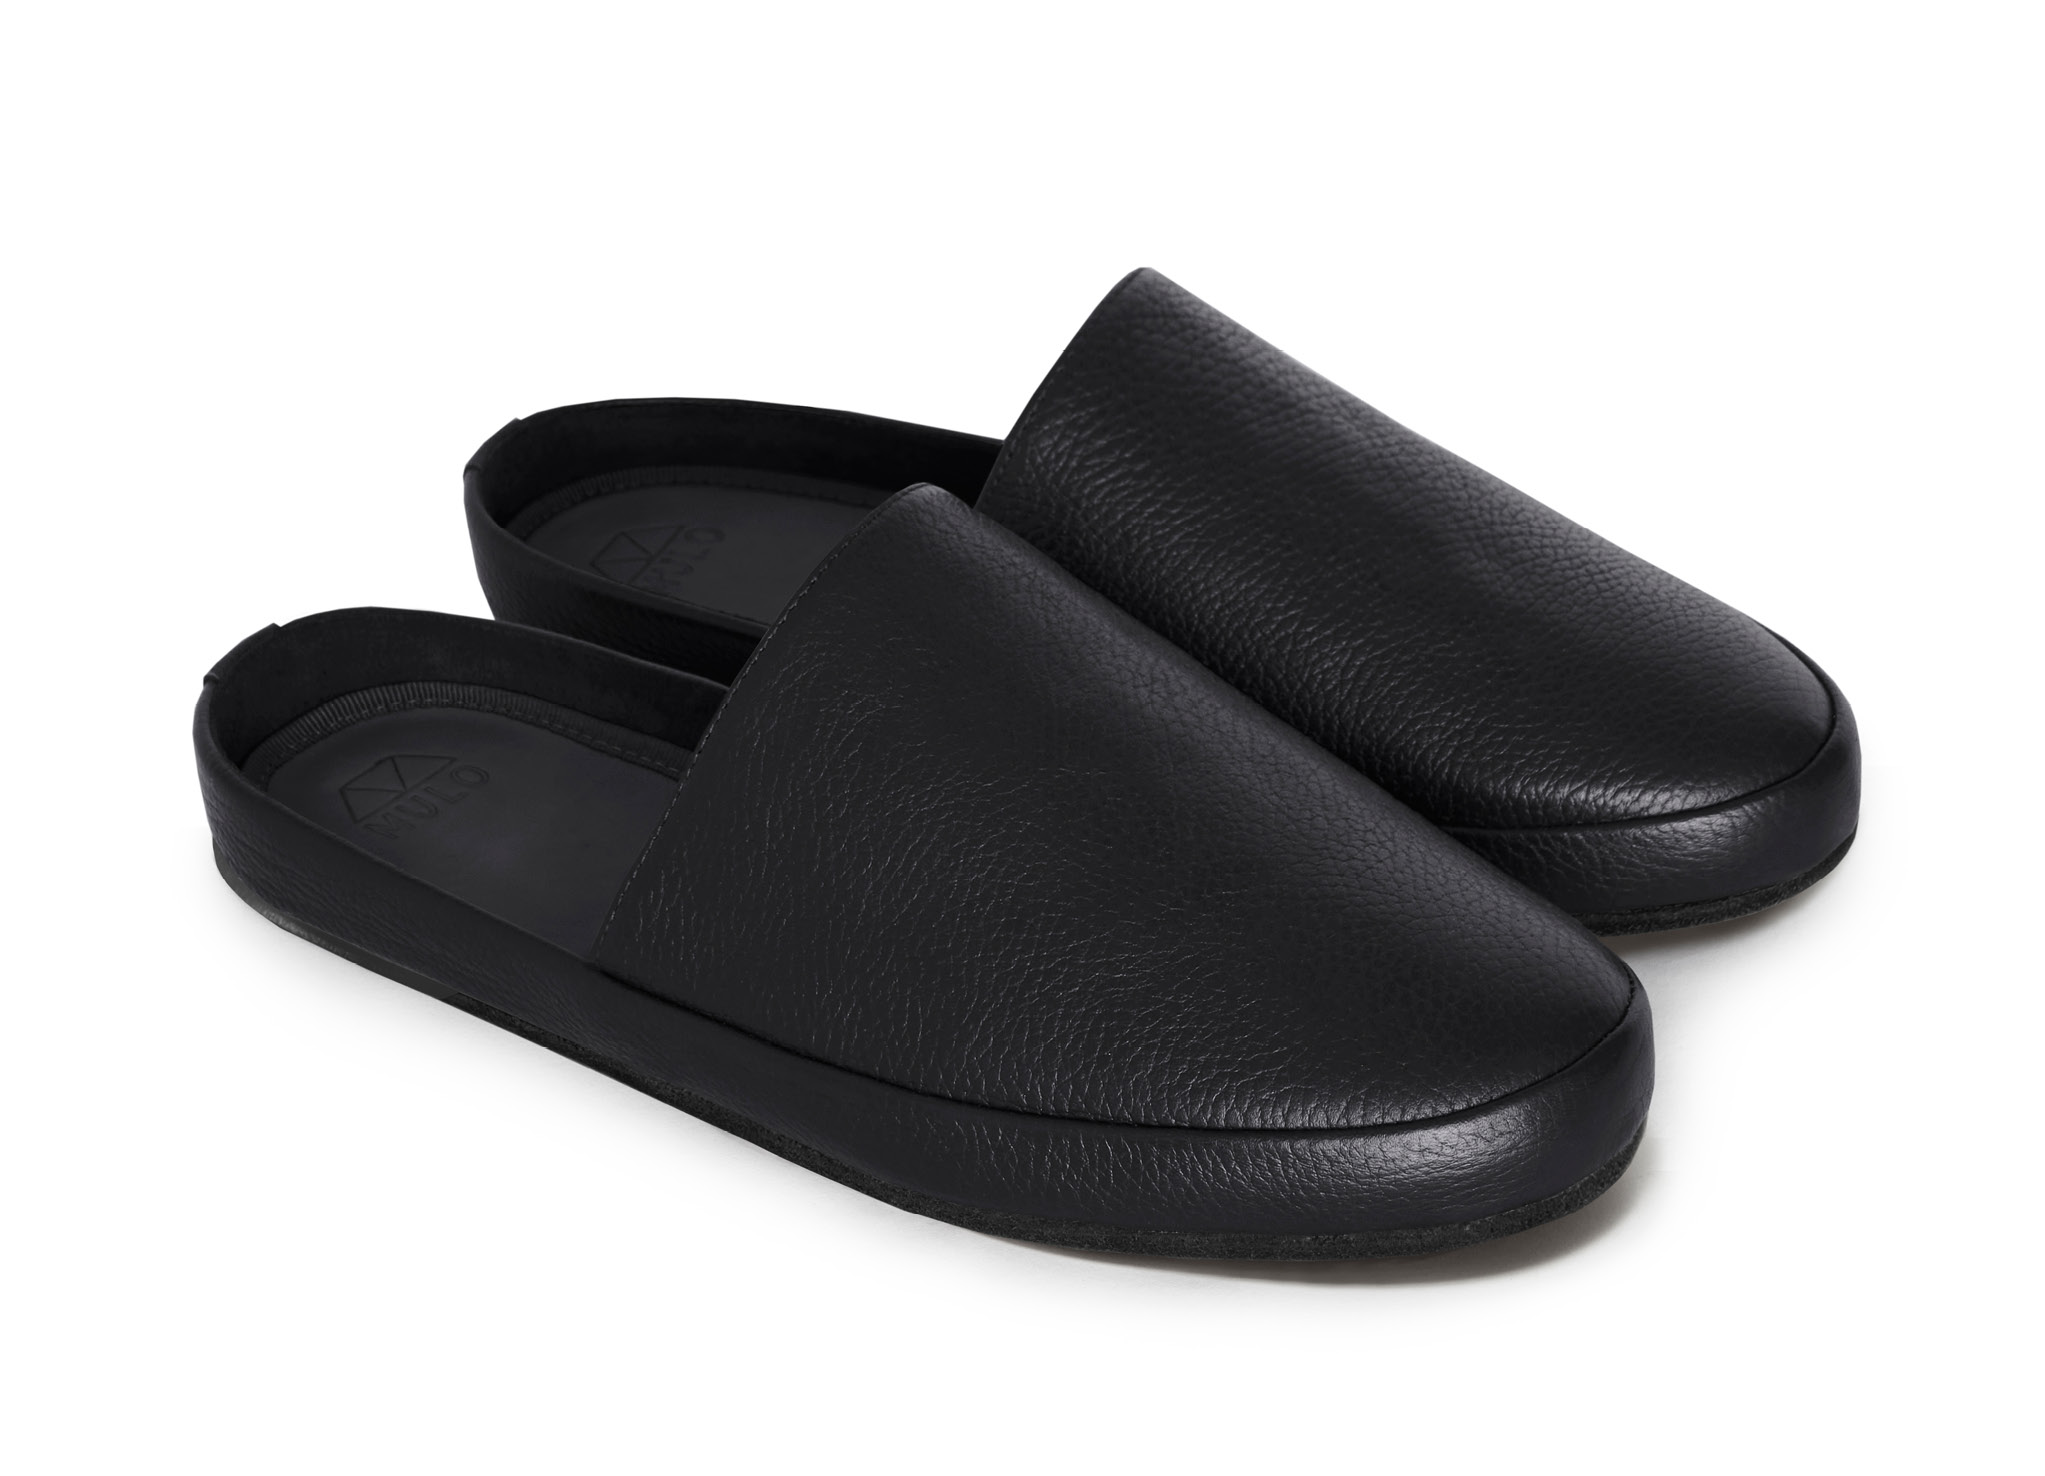 Share more than 79 mens slippers black leather best - dedaotaonec